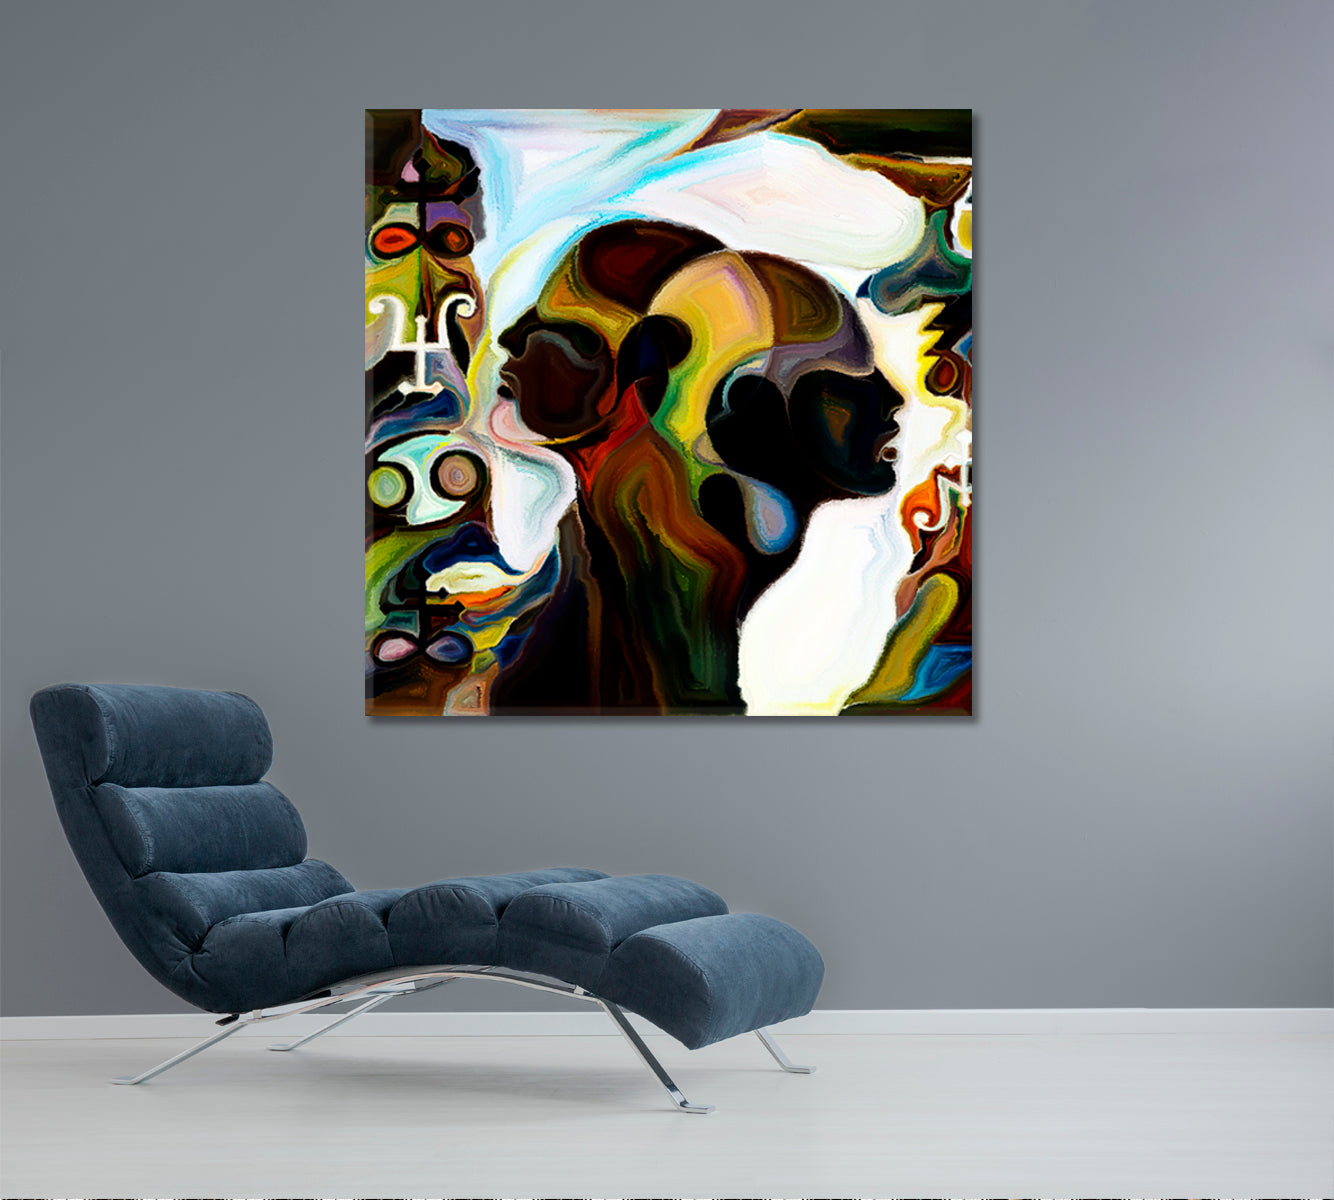 Infinite Forms of Creation Square Panel Contemporary Art Artesty   